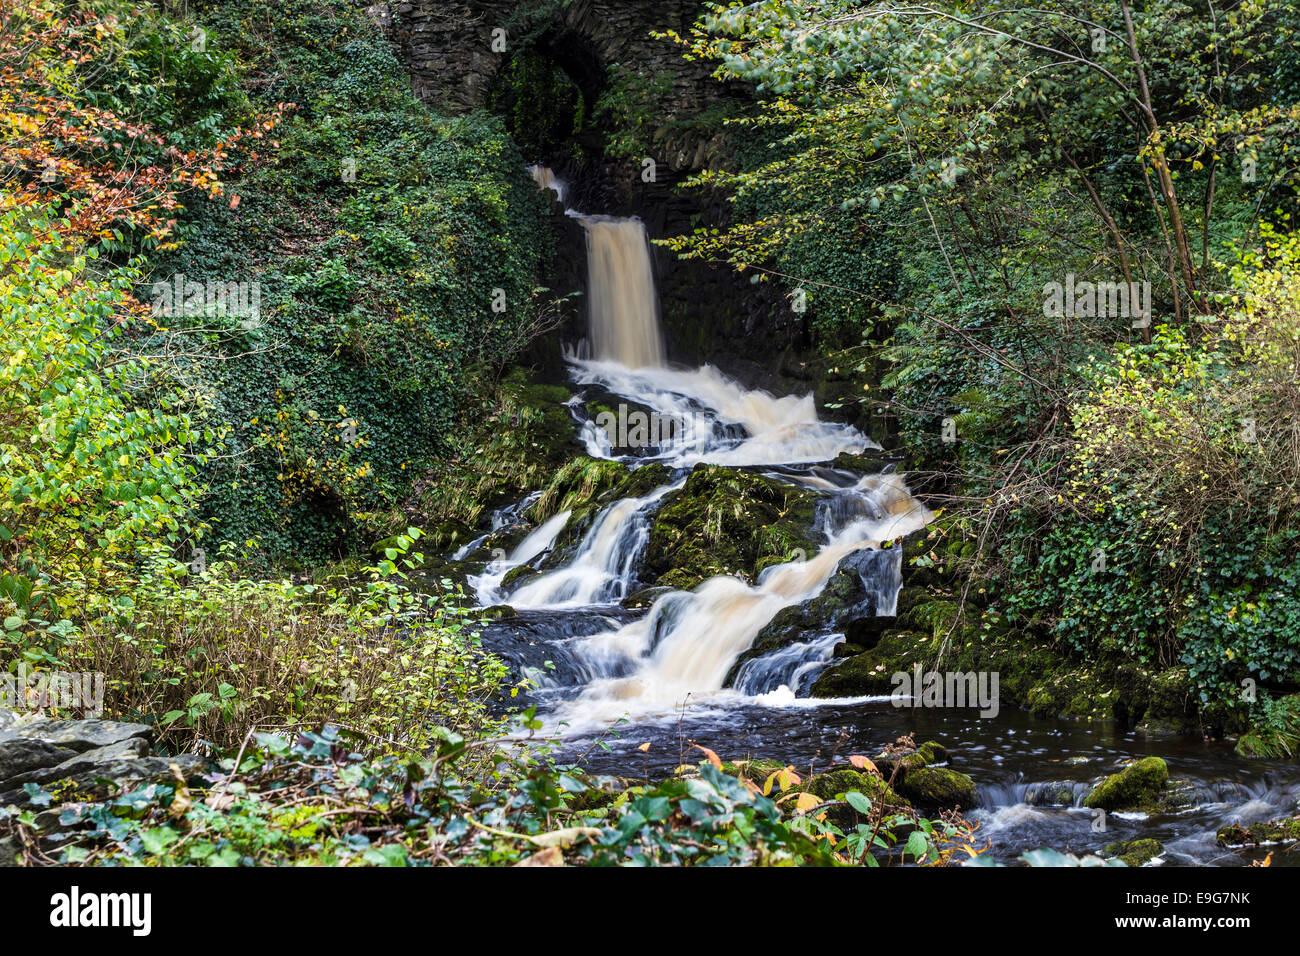 Clapham Falls in the Village of Clapham Yorkshire Dales England UK Stock Photo